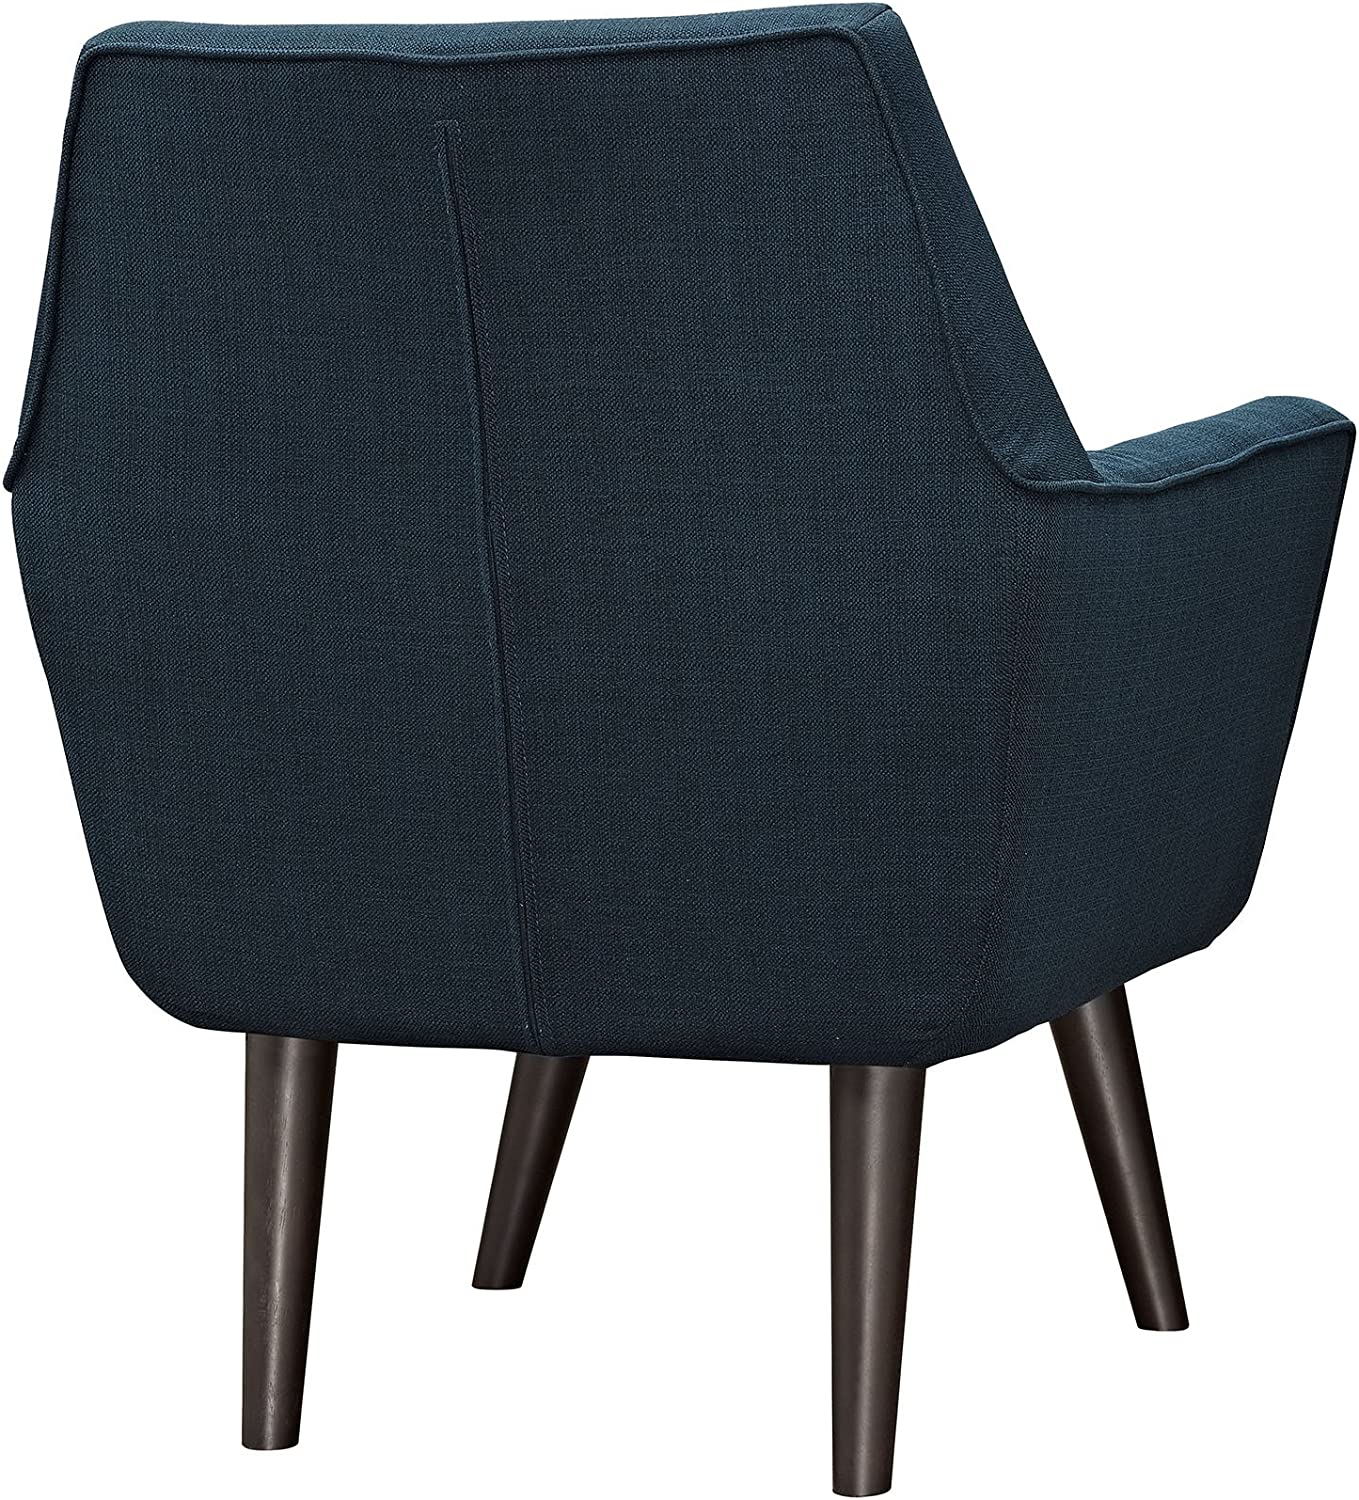 Modway Posit Mid-Century Modern Fabric Upholstered Accent Lounge Arm Chair In Wheatgrass